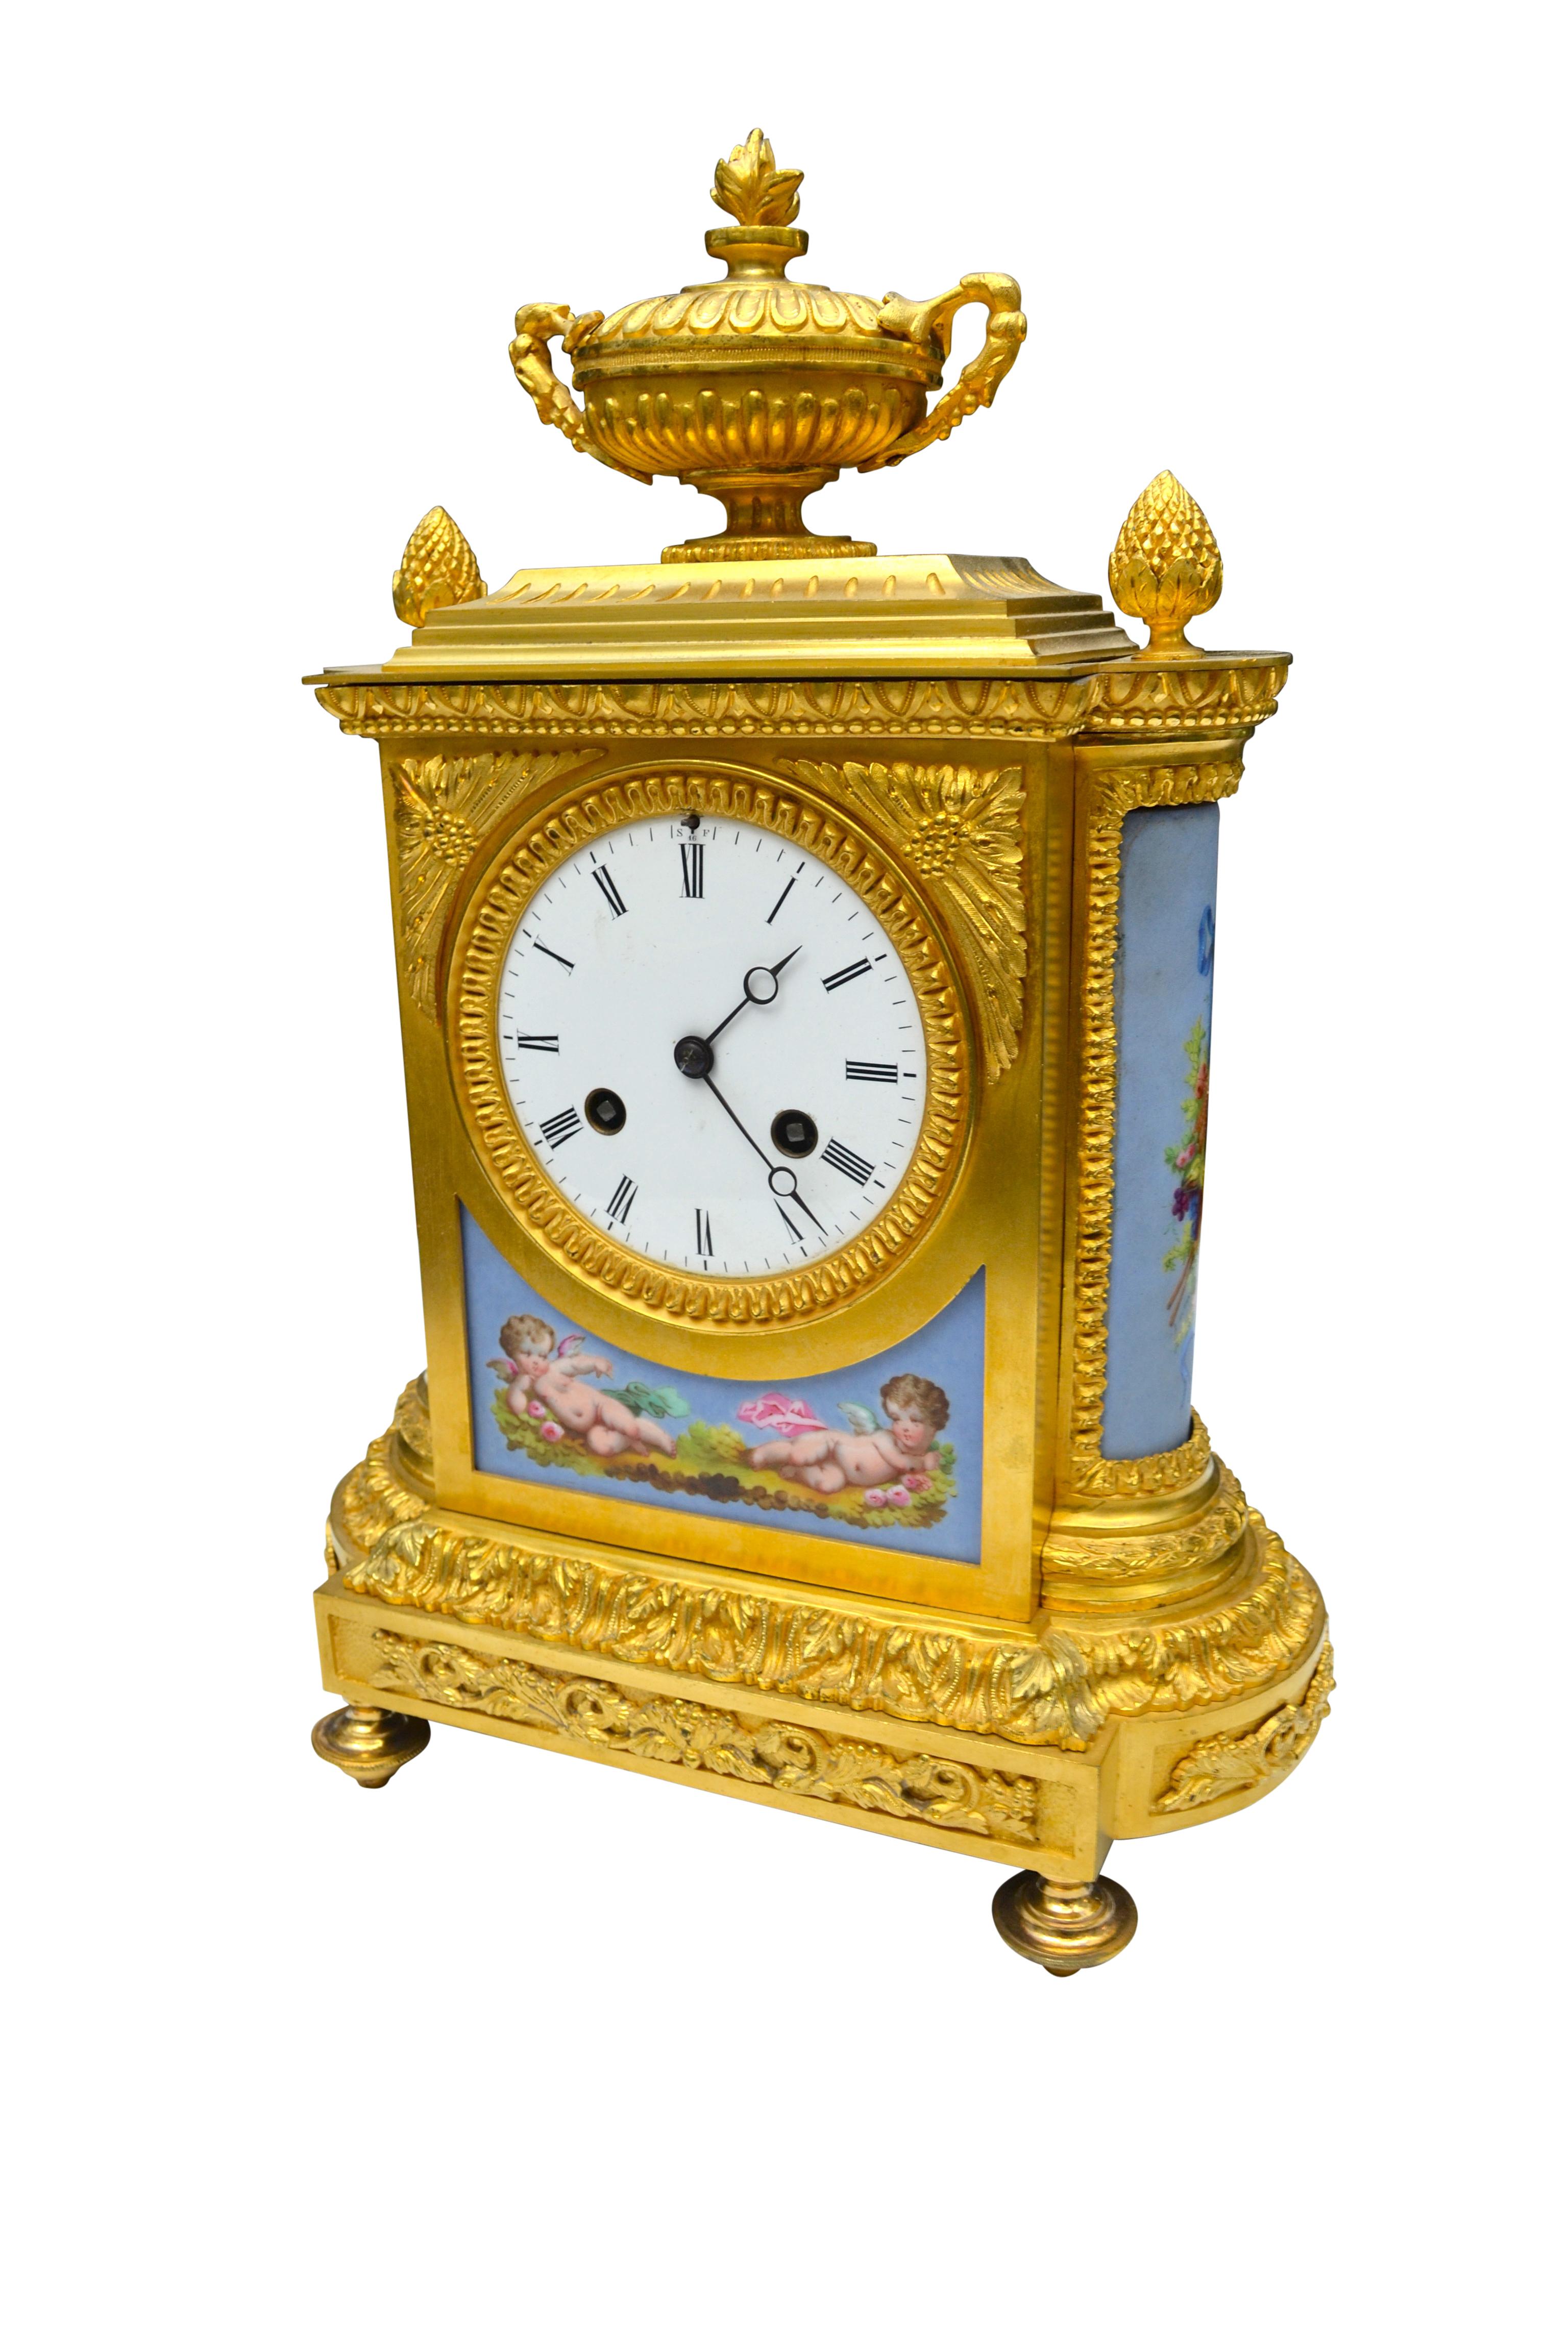 A fine quality Napoleon III gilt bronze and porcelain clock. The sea blue porcelain panels to the sides and front are well painted with frolicking putti; the case surmounted with a pineapple finials and a decorative gilded urn; the large white